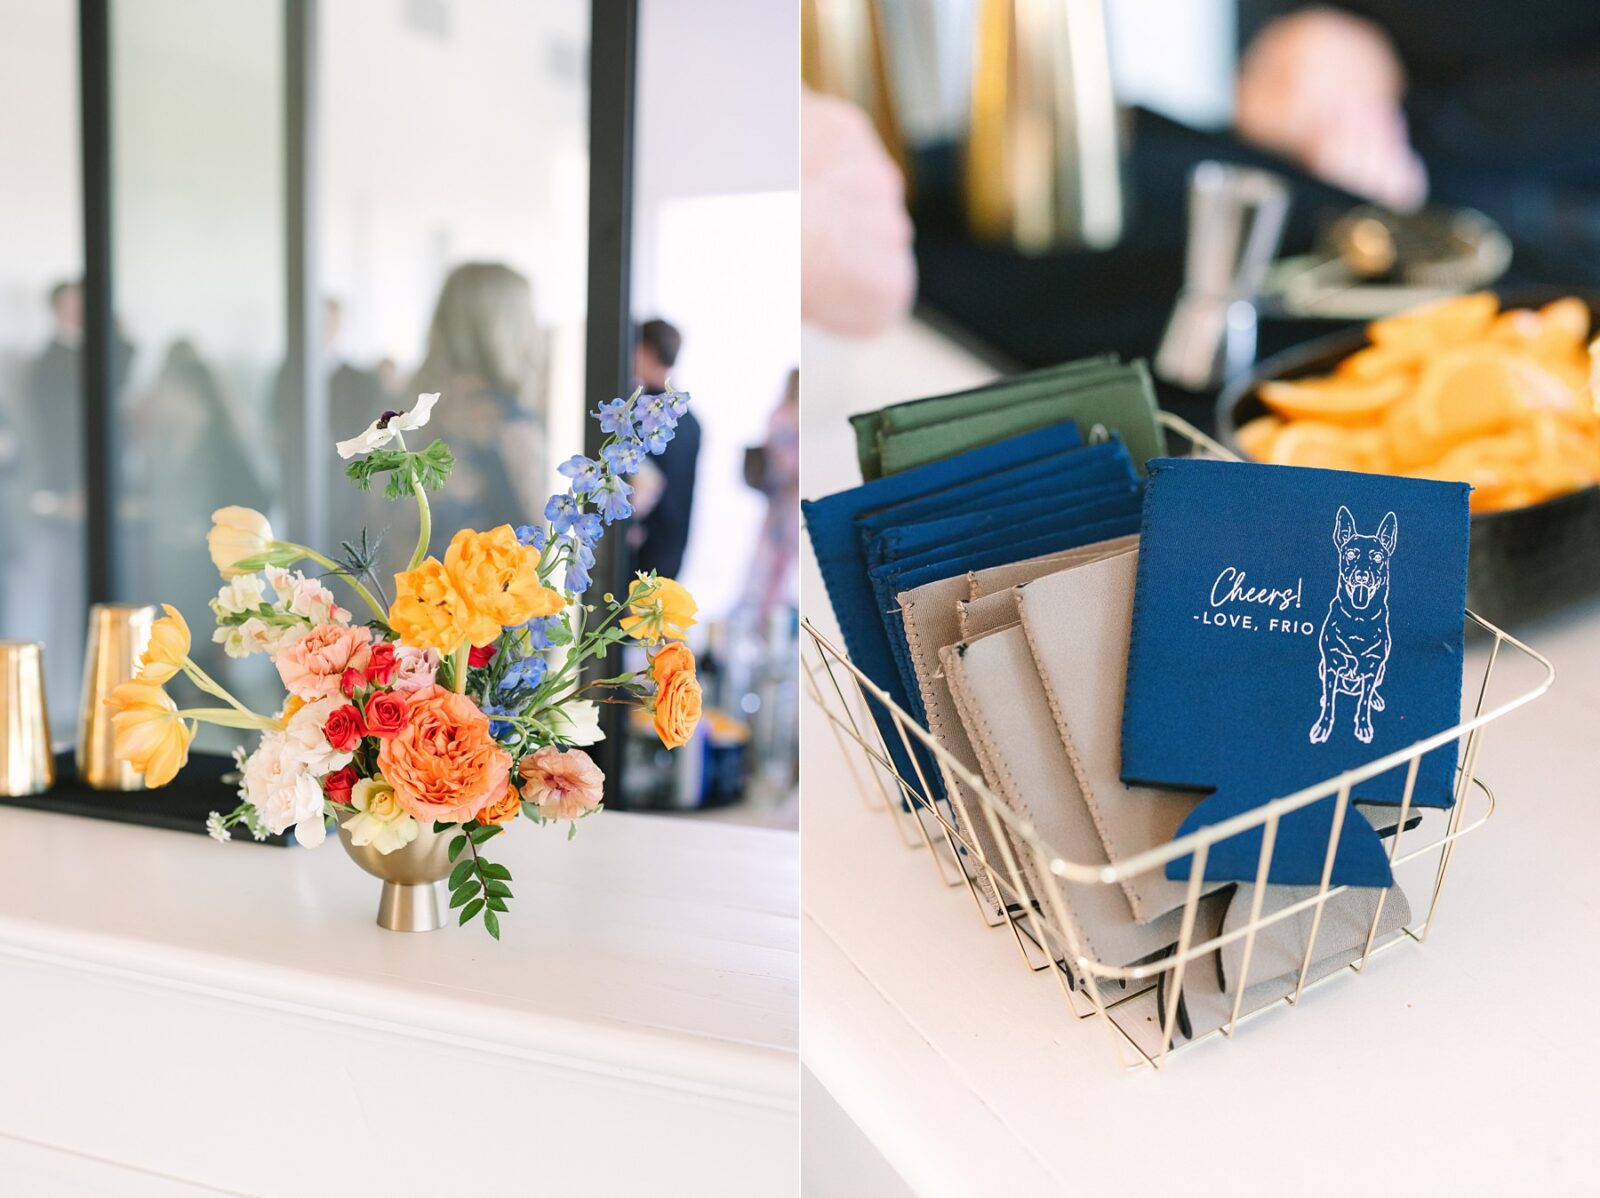 wedding koozie with dog, dog wedding decor, dog wedding favors, wedding at the videre estate venue, wimberley, photos by Tara Lyons Photography, Perry's Petal, planning by sweet magnolia events